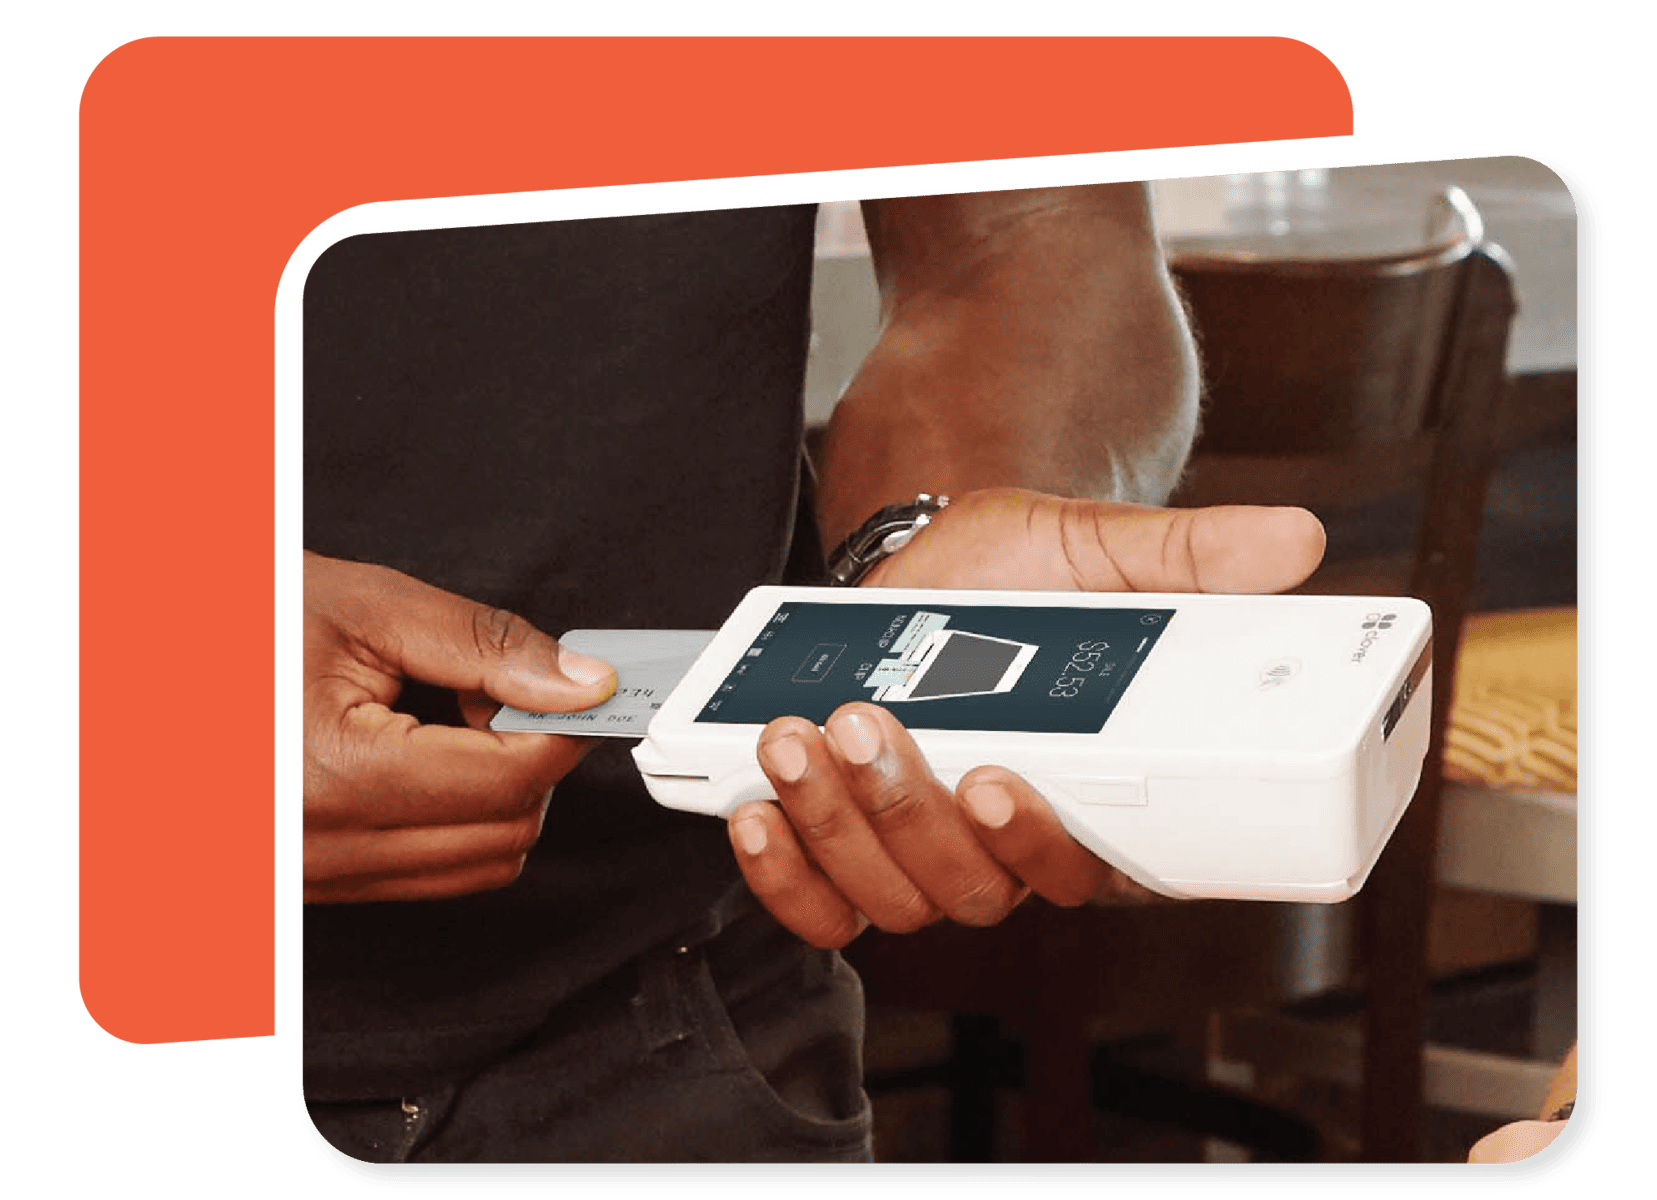 CardFree Mobile POS, drive-thru order and pay system